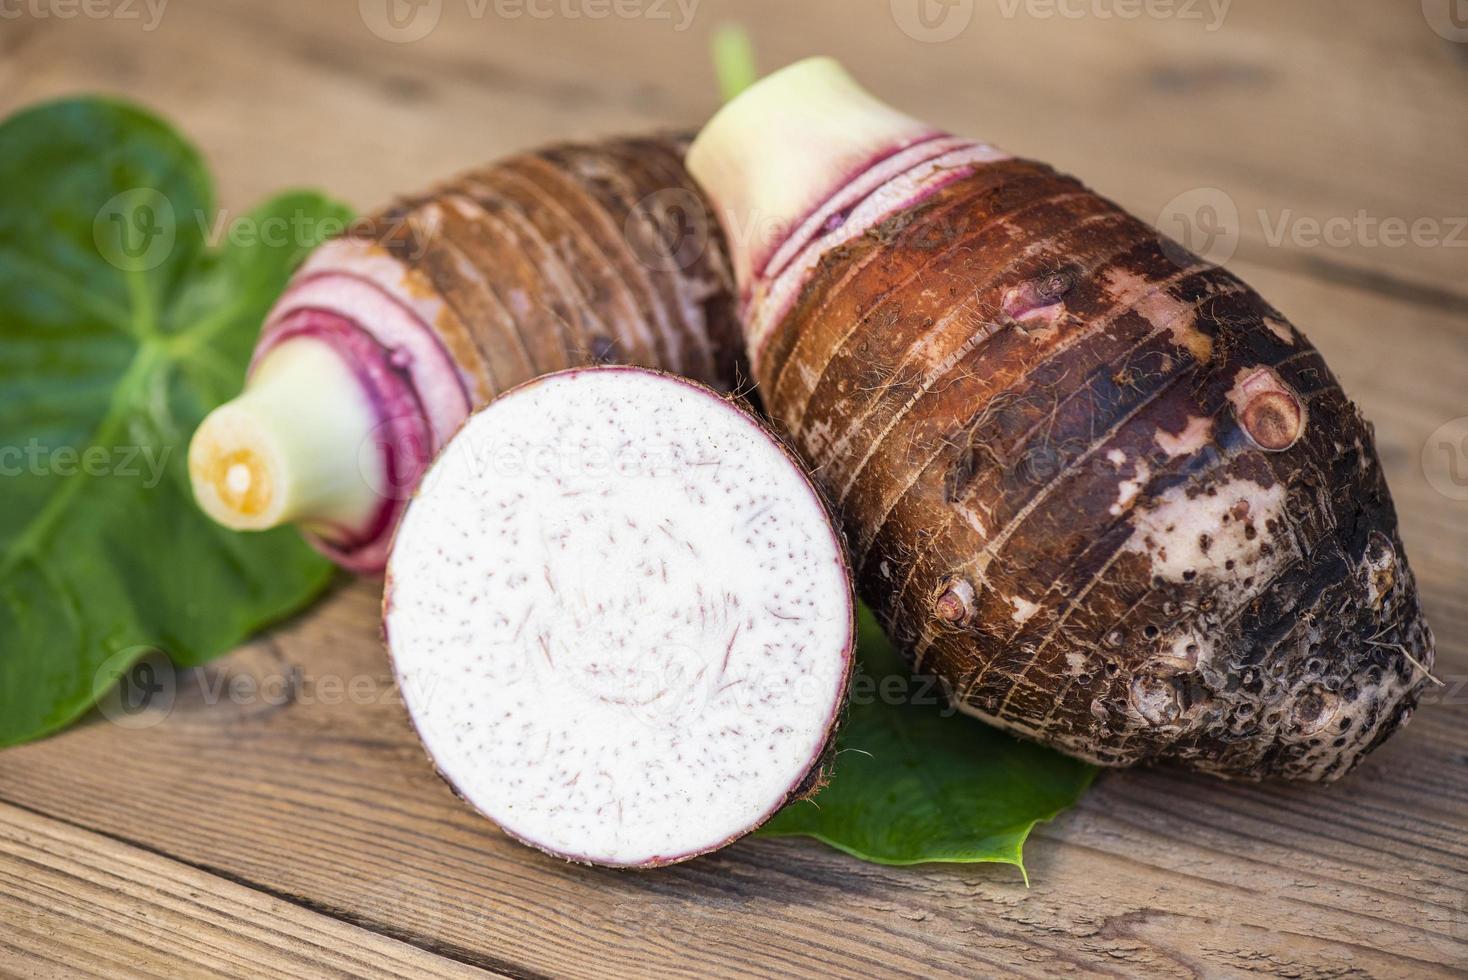 Taro root with half slice on taro leaf and wooden background, Fresh raw organic taro root ready to cook photo